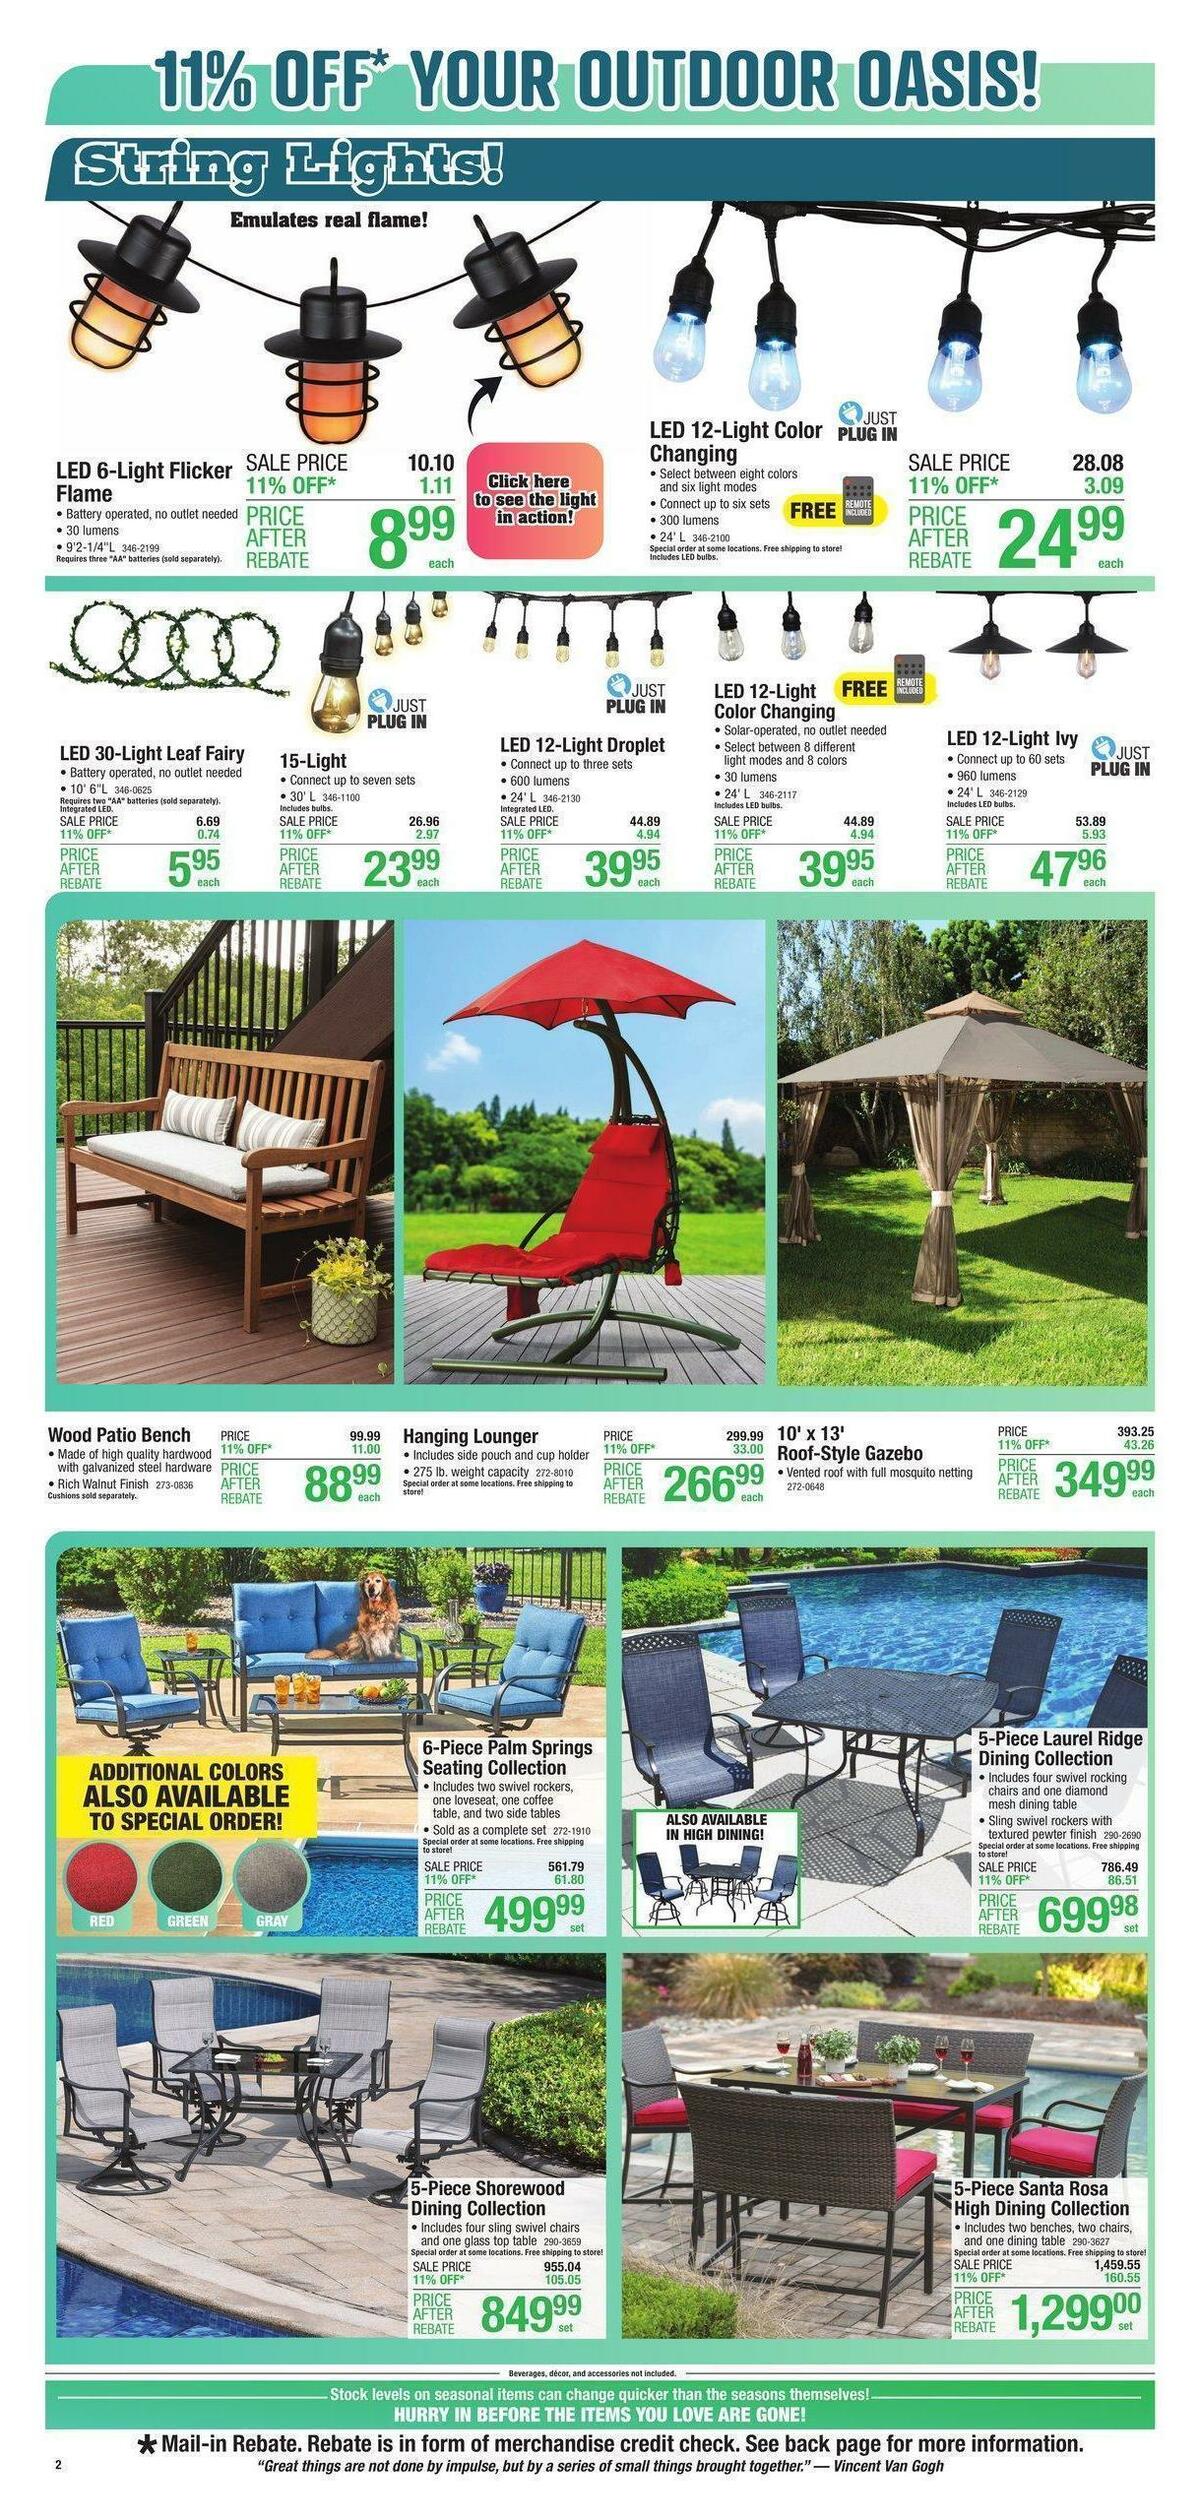 Menards Save 11% On Outdoor Living Weekly Ad from April 5